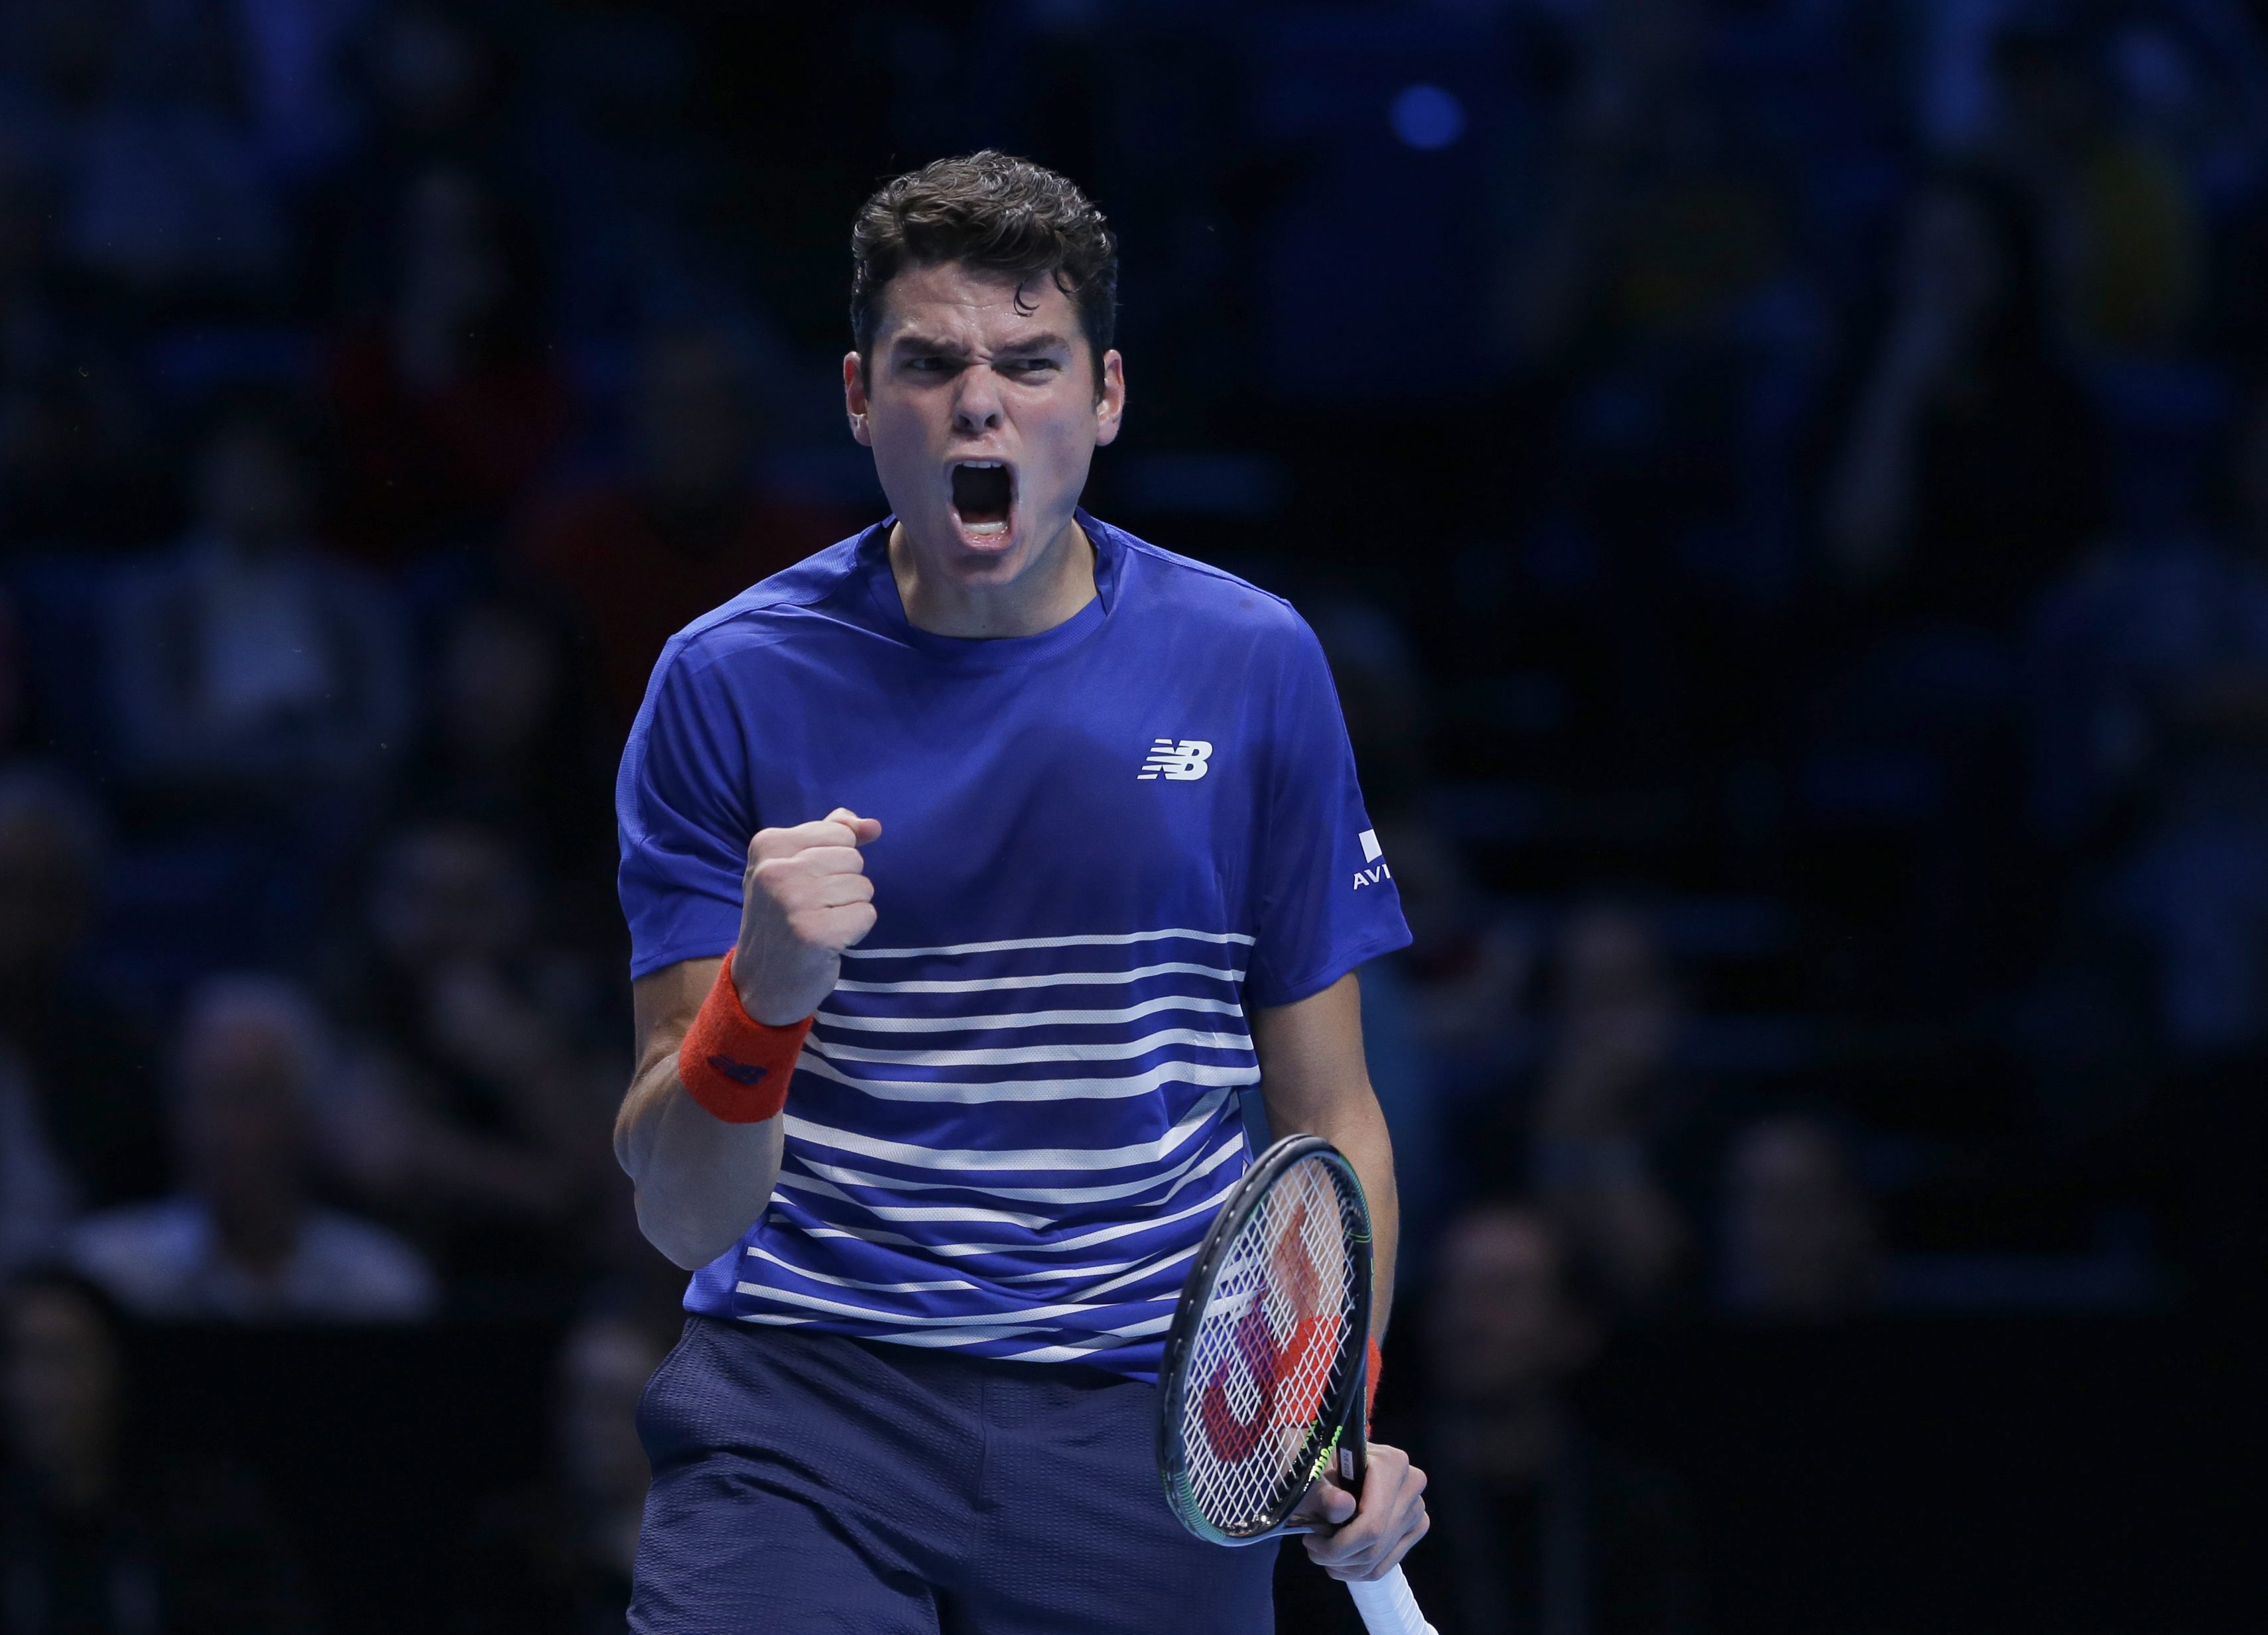 Canada's Milos Raonic reacts after winning a game against Serbia's Novak Djokovic during their ATP World Tour Finals singles tennis match at the O2 arena in London, Tuesday, Nov. 15, 2016. (AP Photo/Alastair Grant)